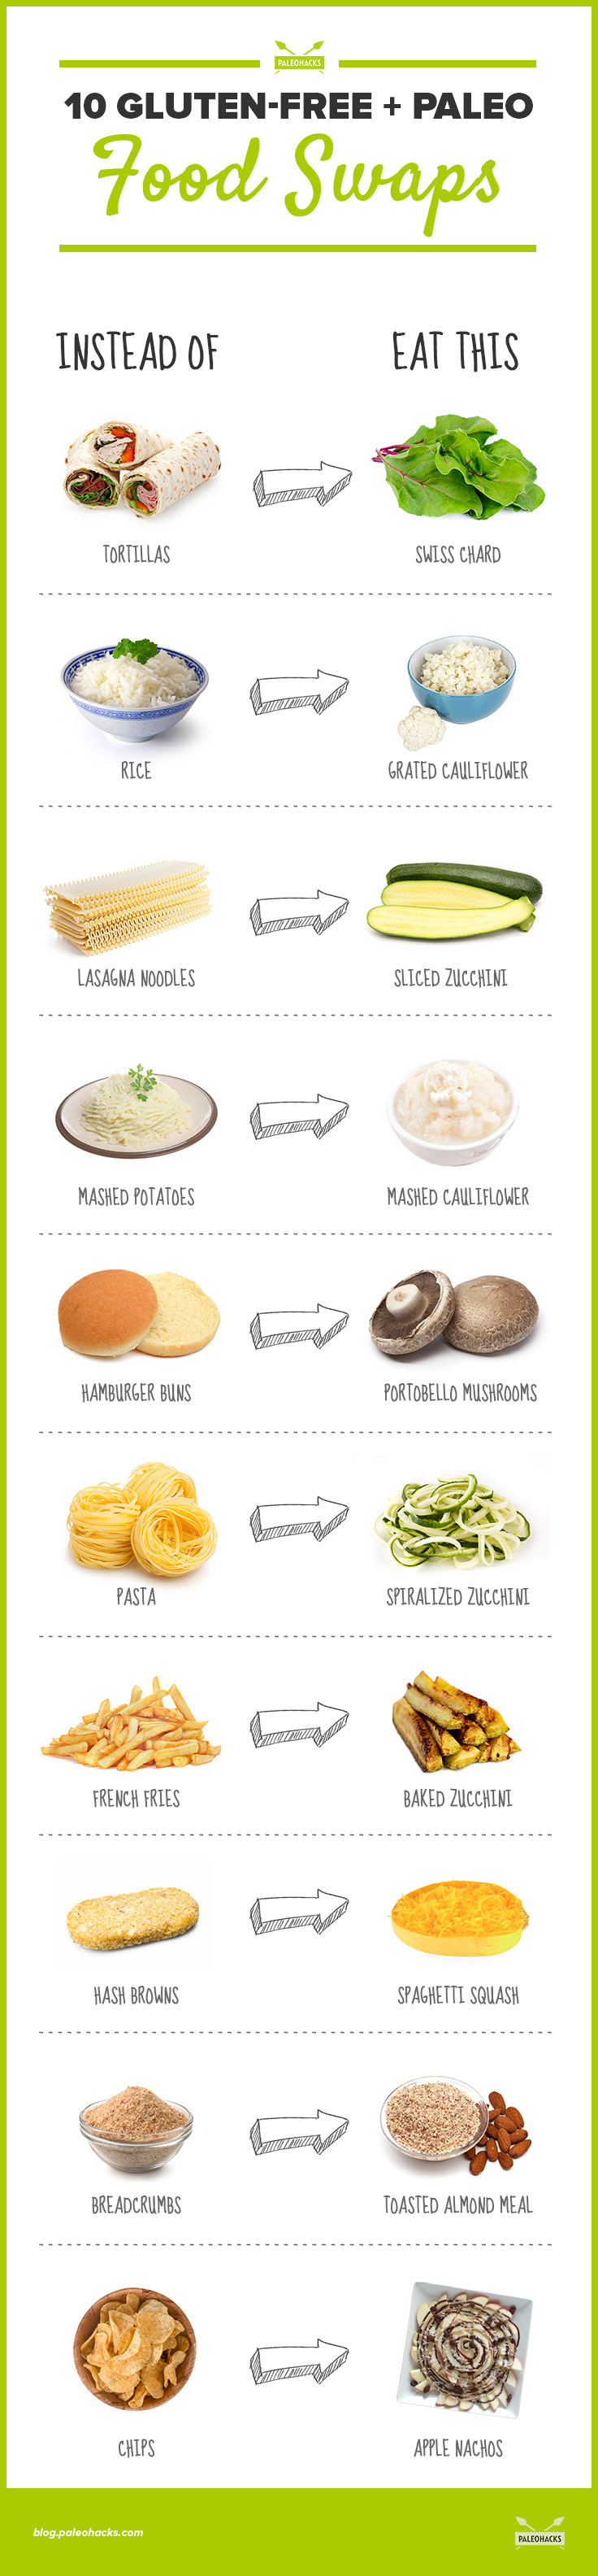 Gluten-free is all the rage, but sometimes these products are heavily processed. Make a few simple food swaps in favor of heathy veggies.